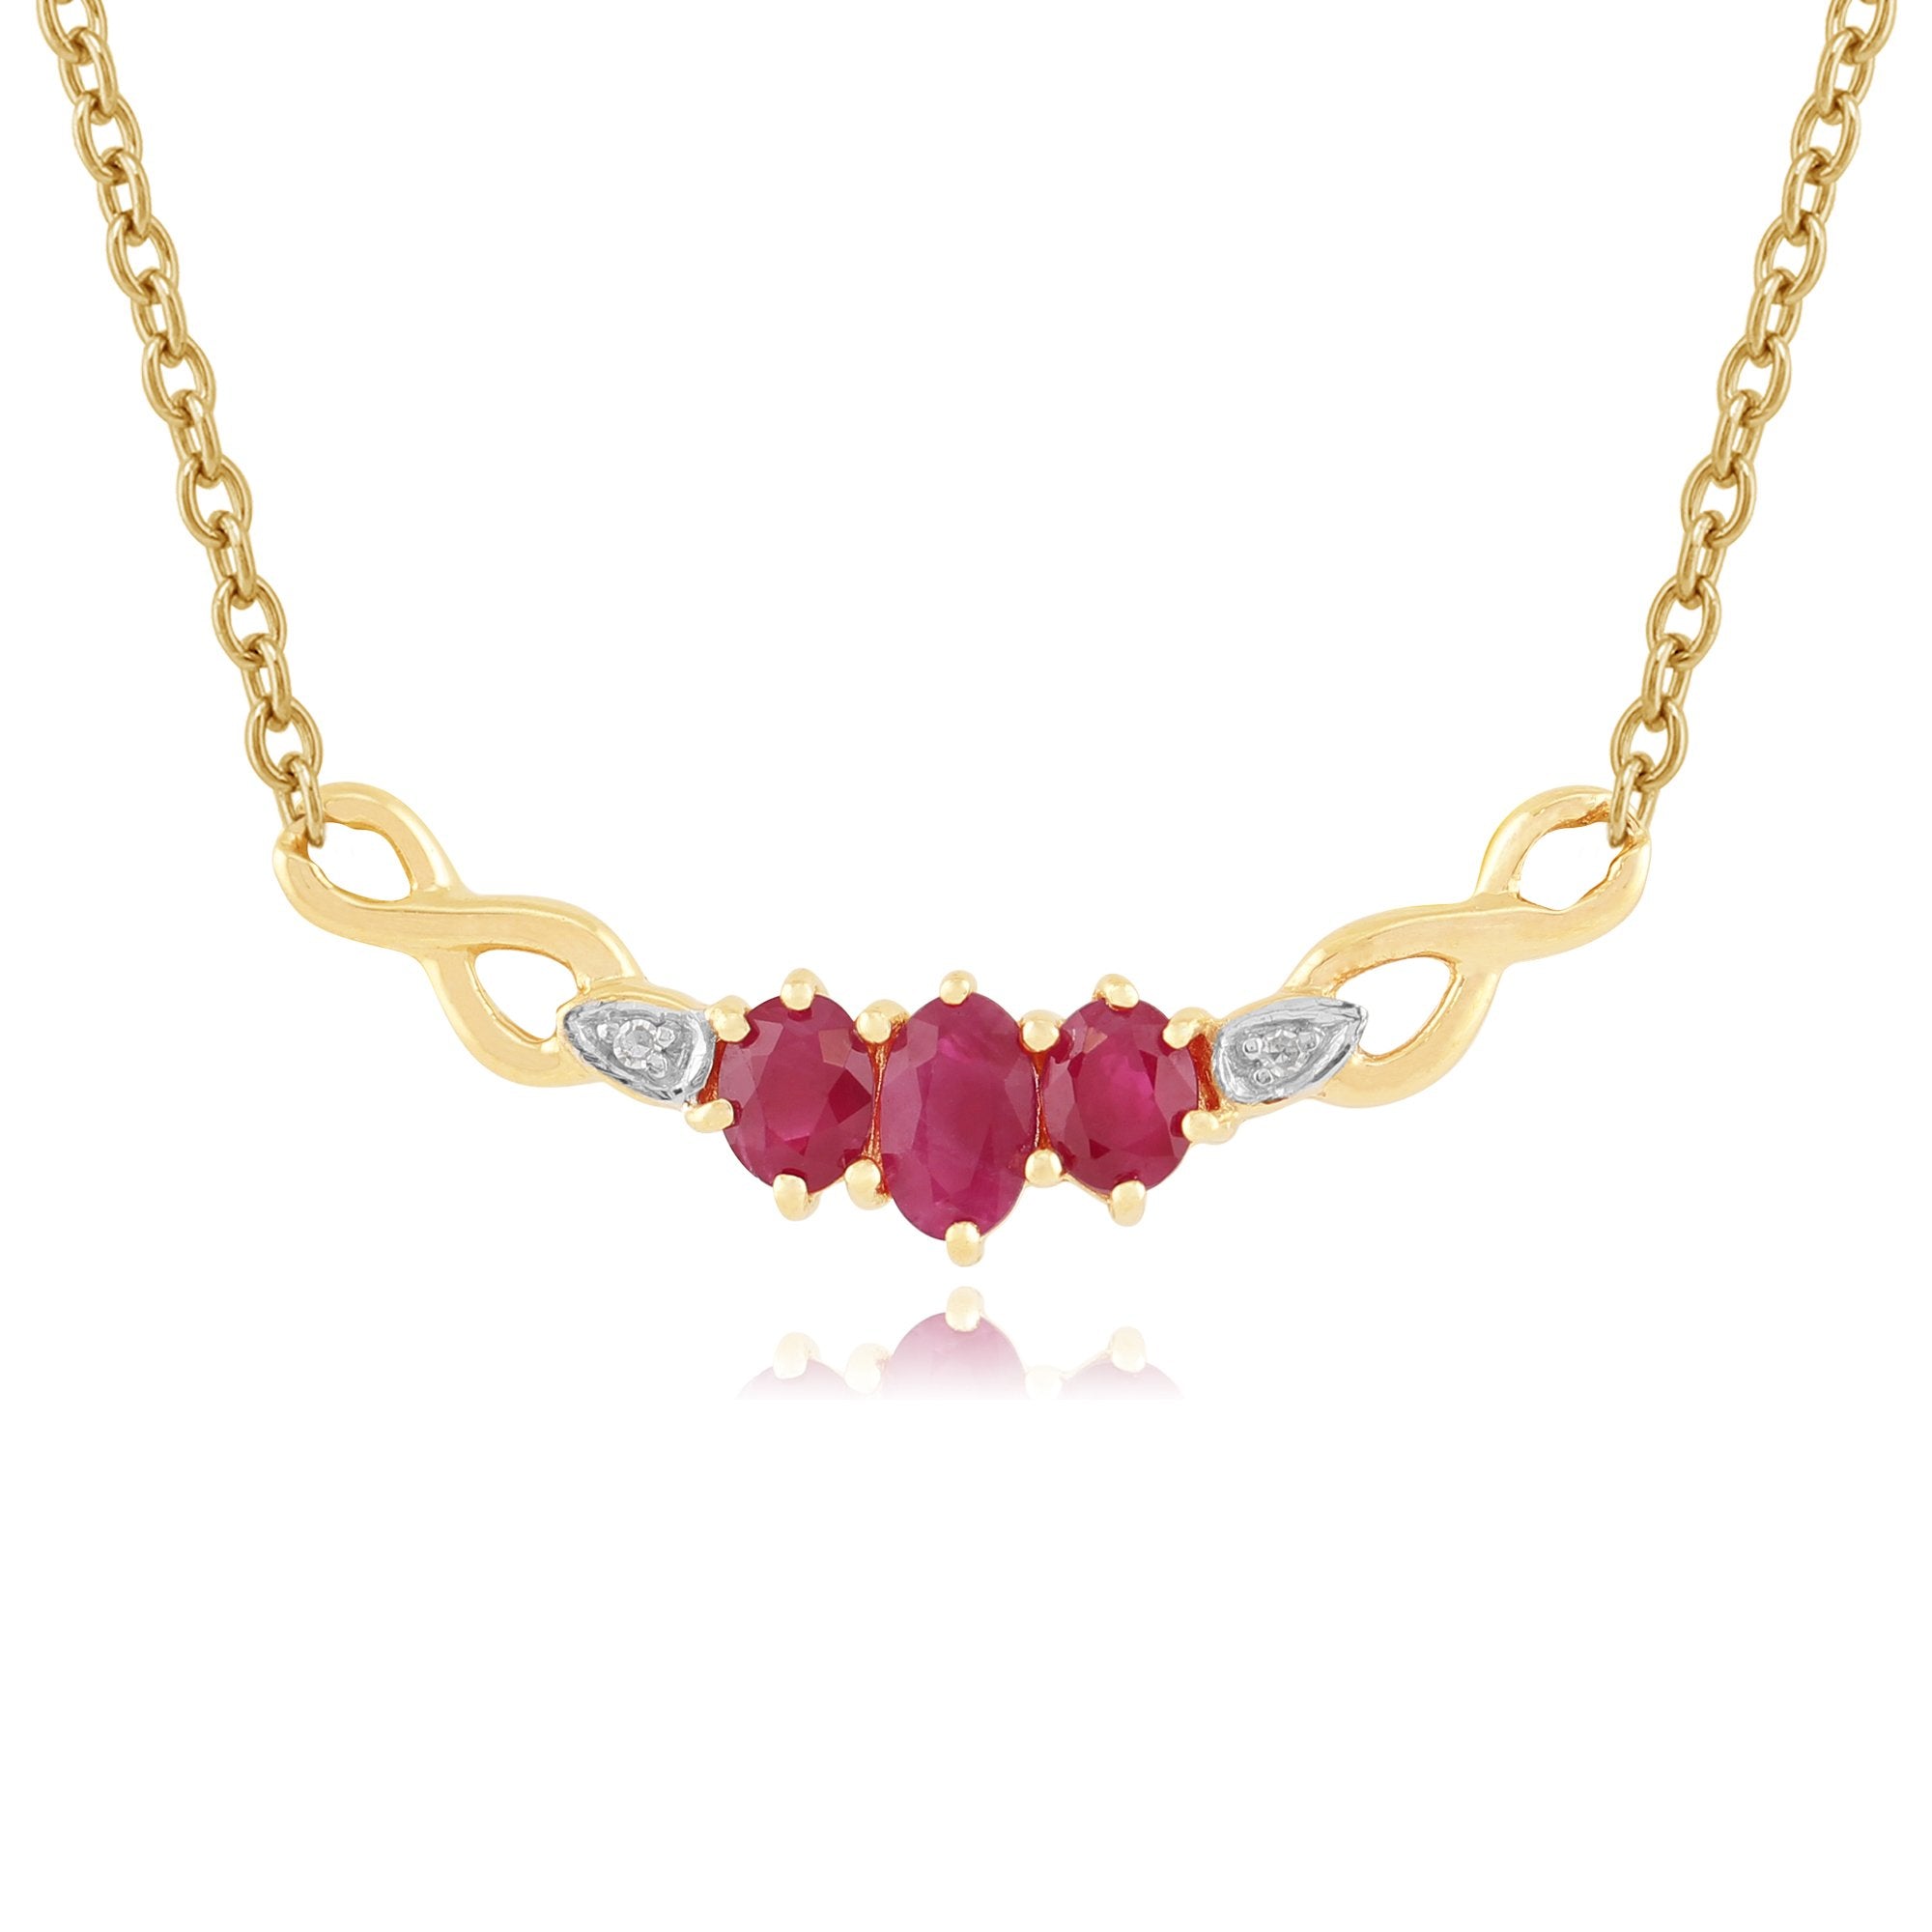 Classic Oval Ruby & Diamond Necklace in 9ct Yellow Gold